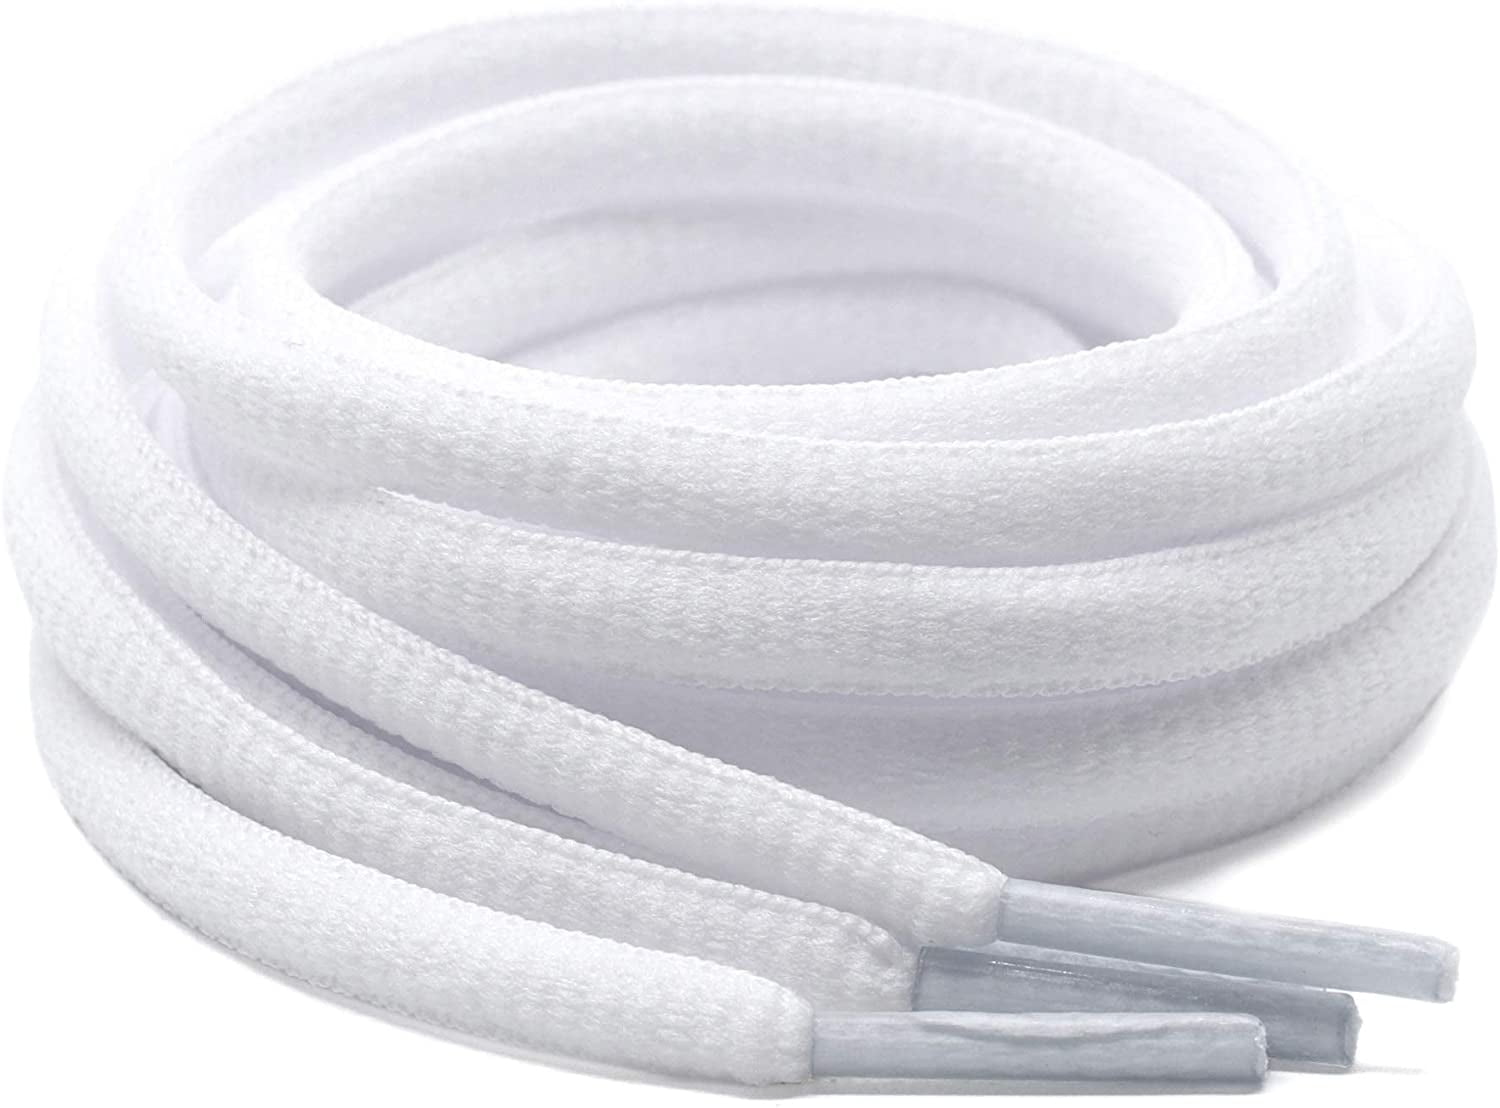 Sport Athletic Sneakers String "White" Shoelaces Oval 36",45" 